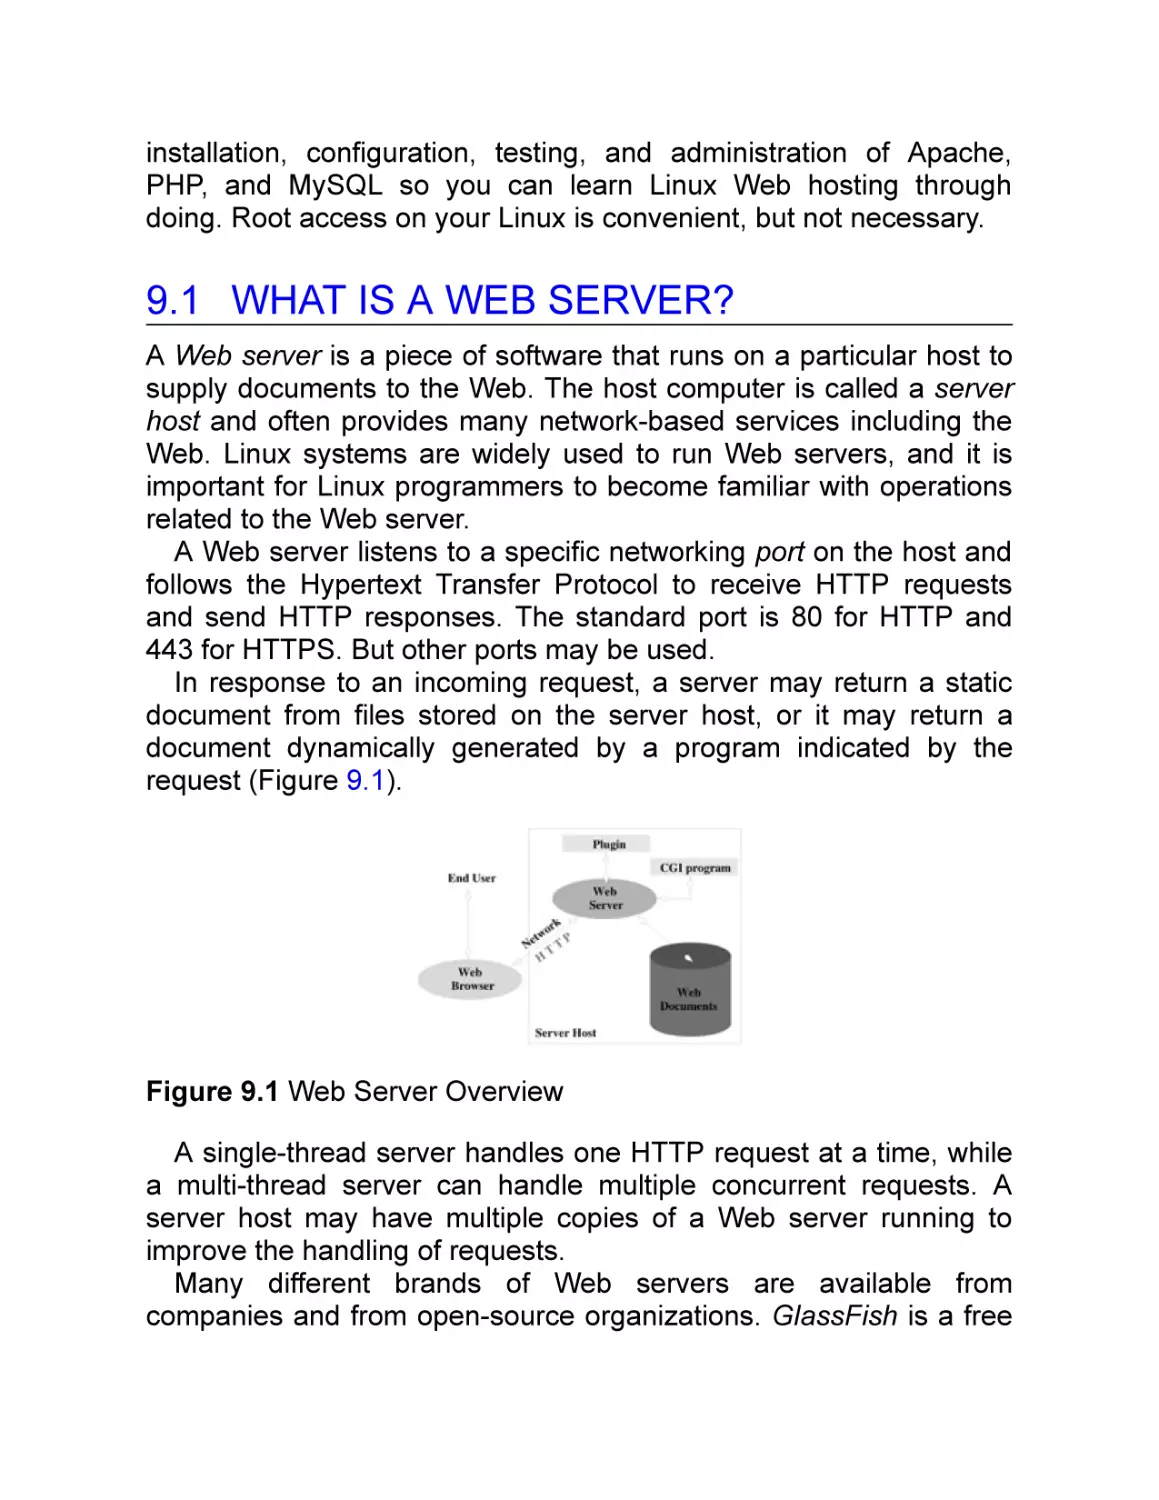 9.1 What Is a Web Server?